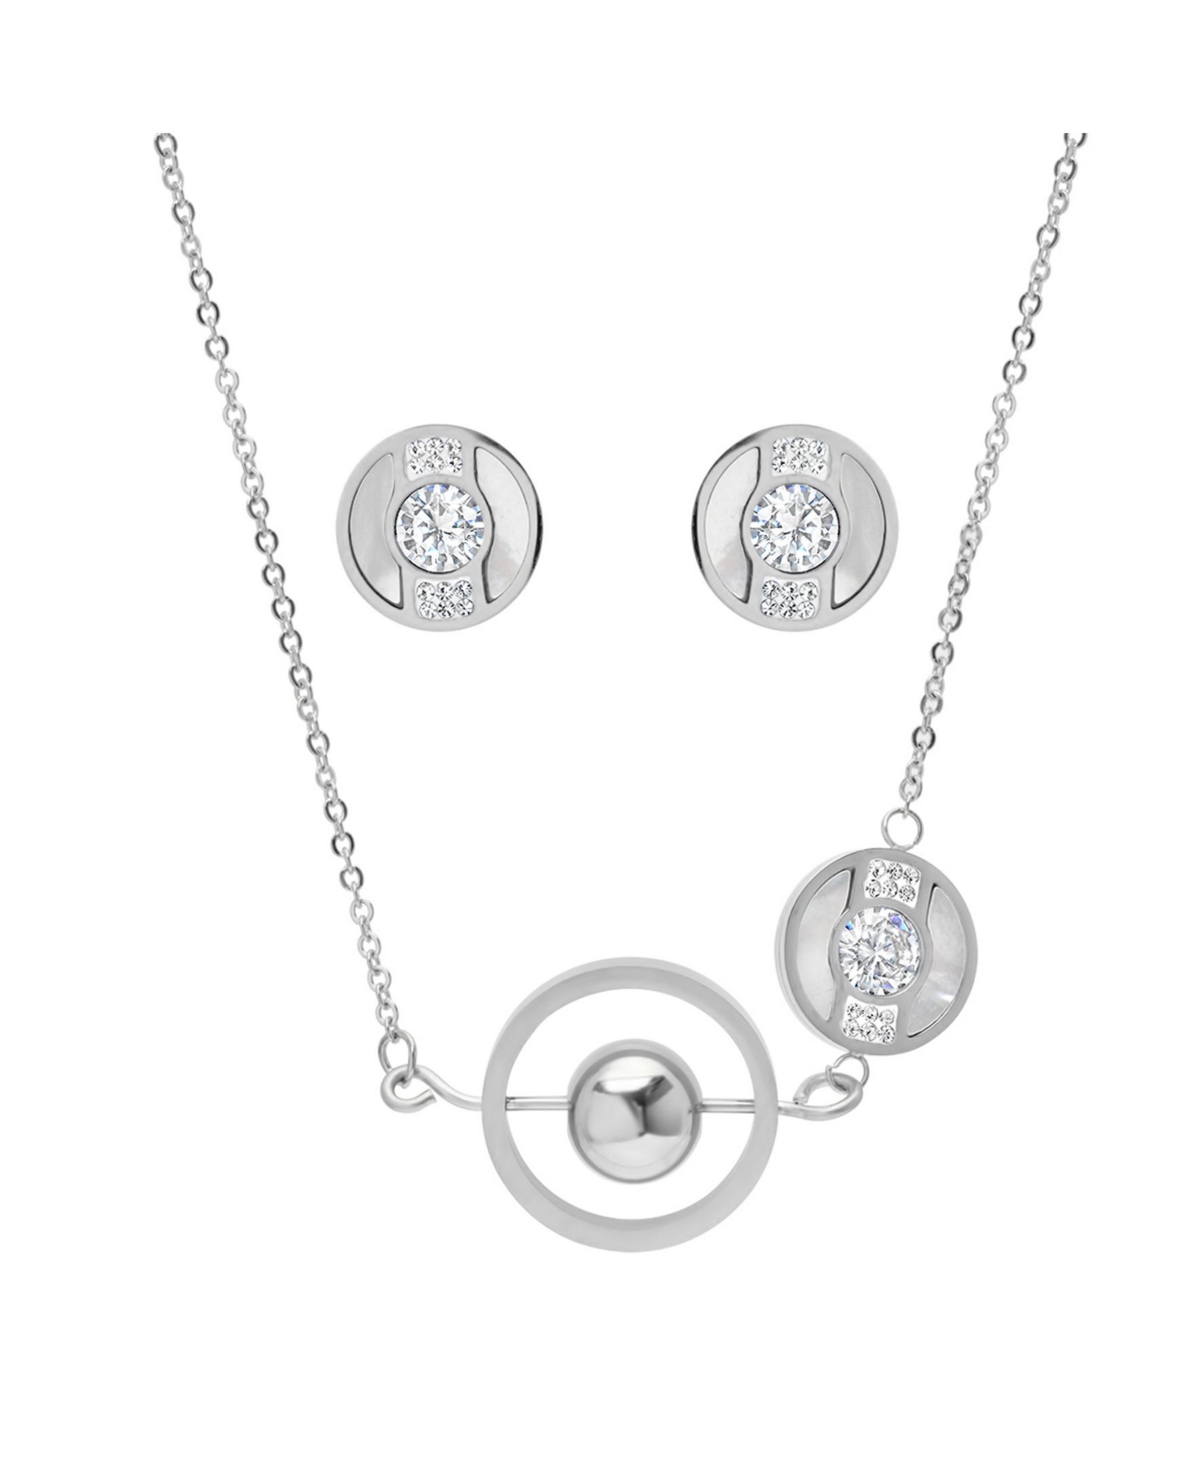 Ladies Stainless Steel Circle and Bar Design Necklace Set, 2 Piece - Silver-Plated